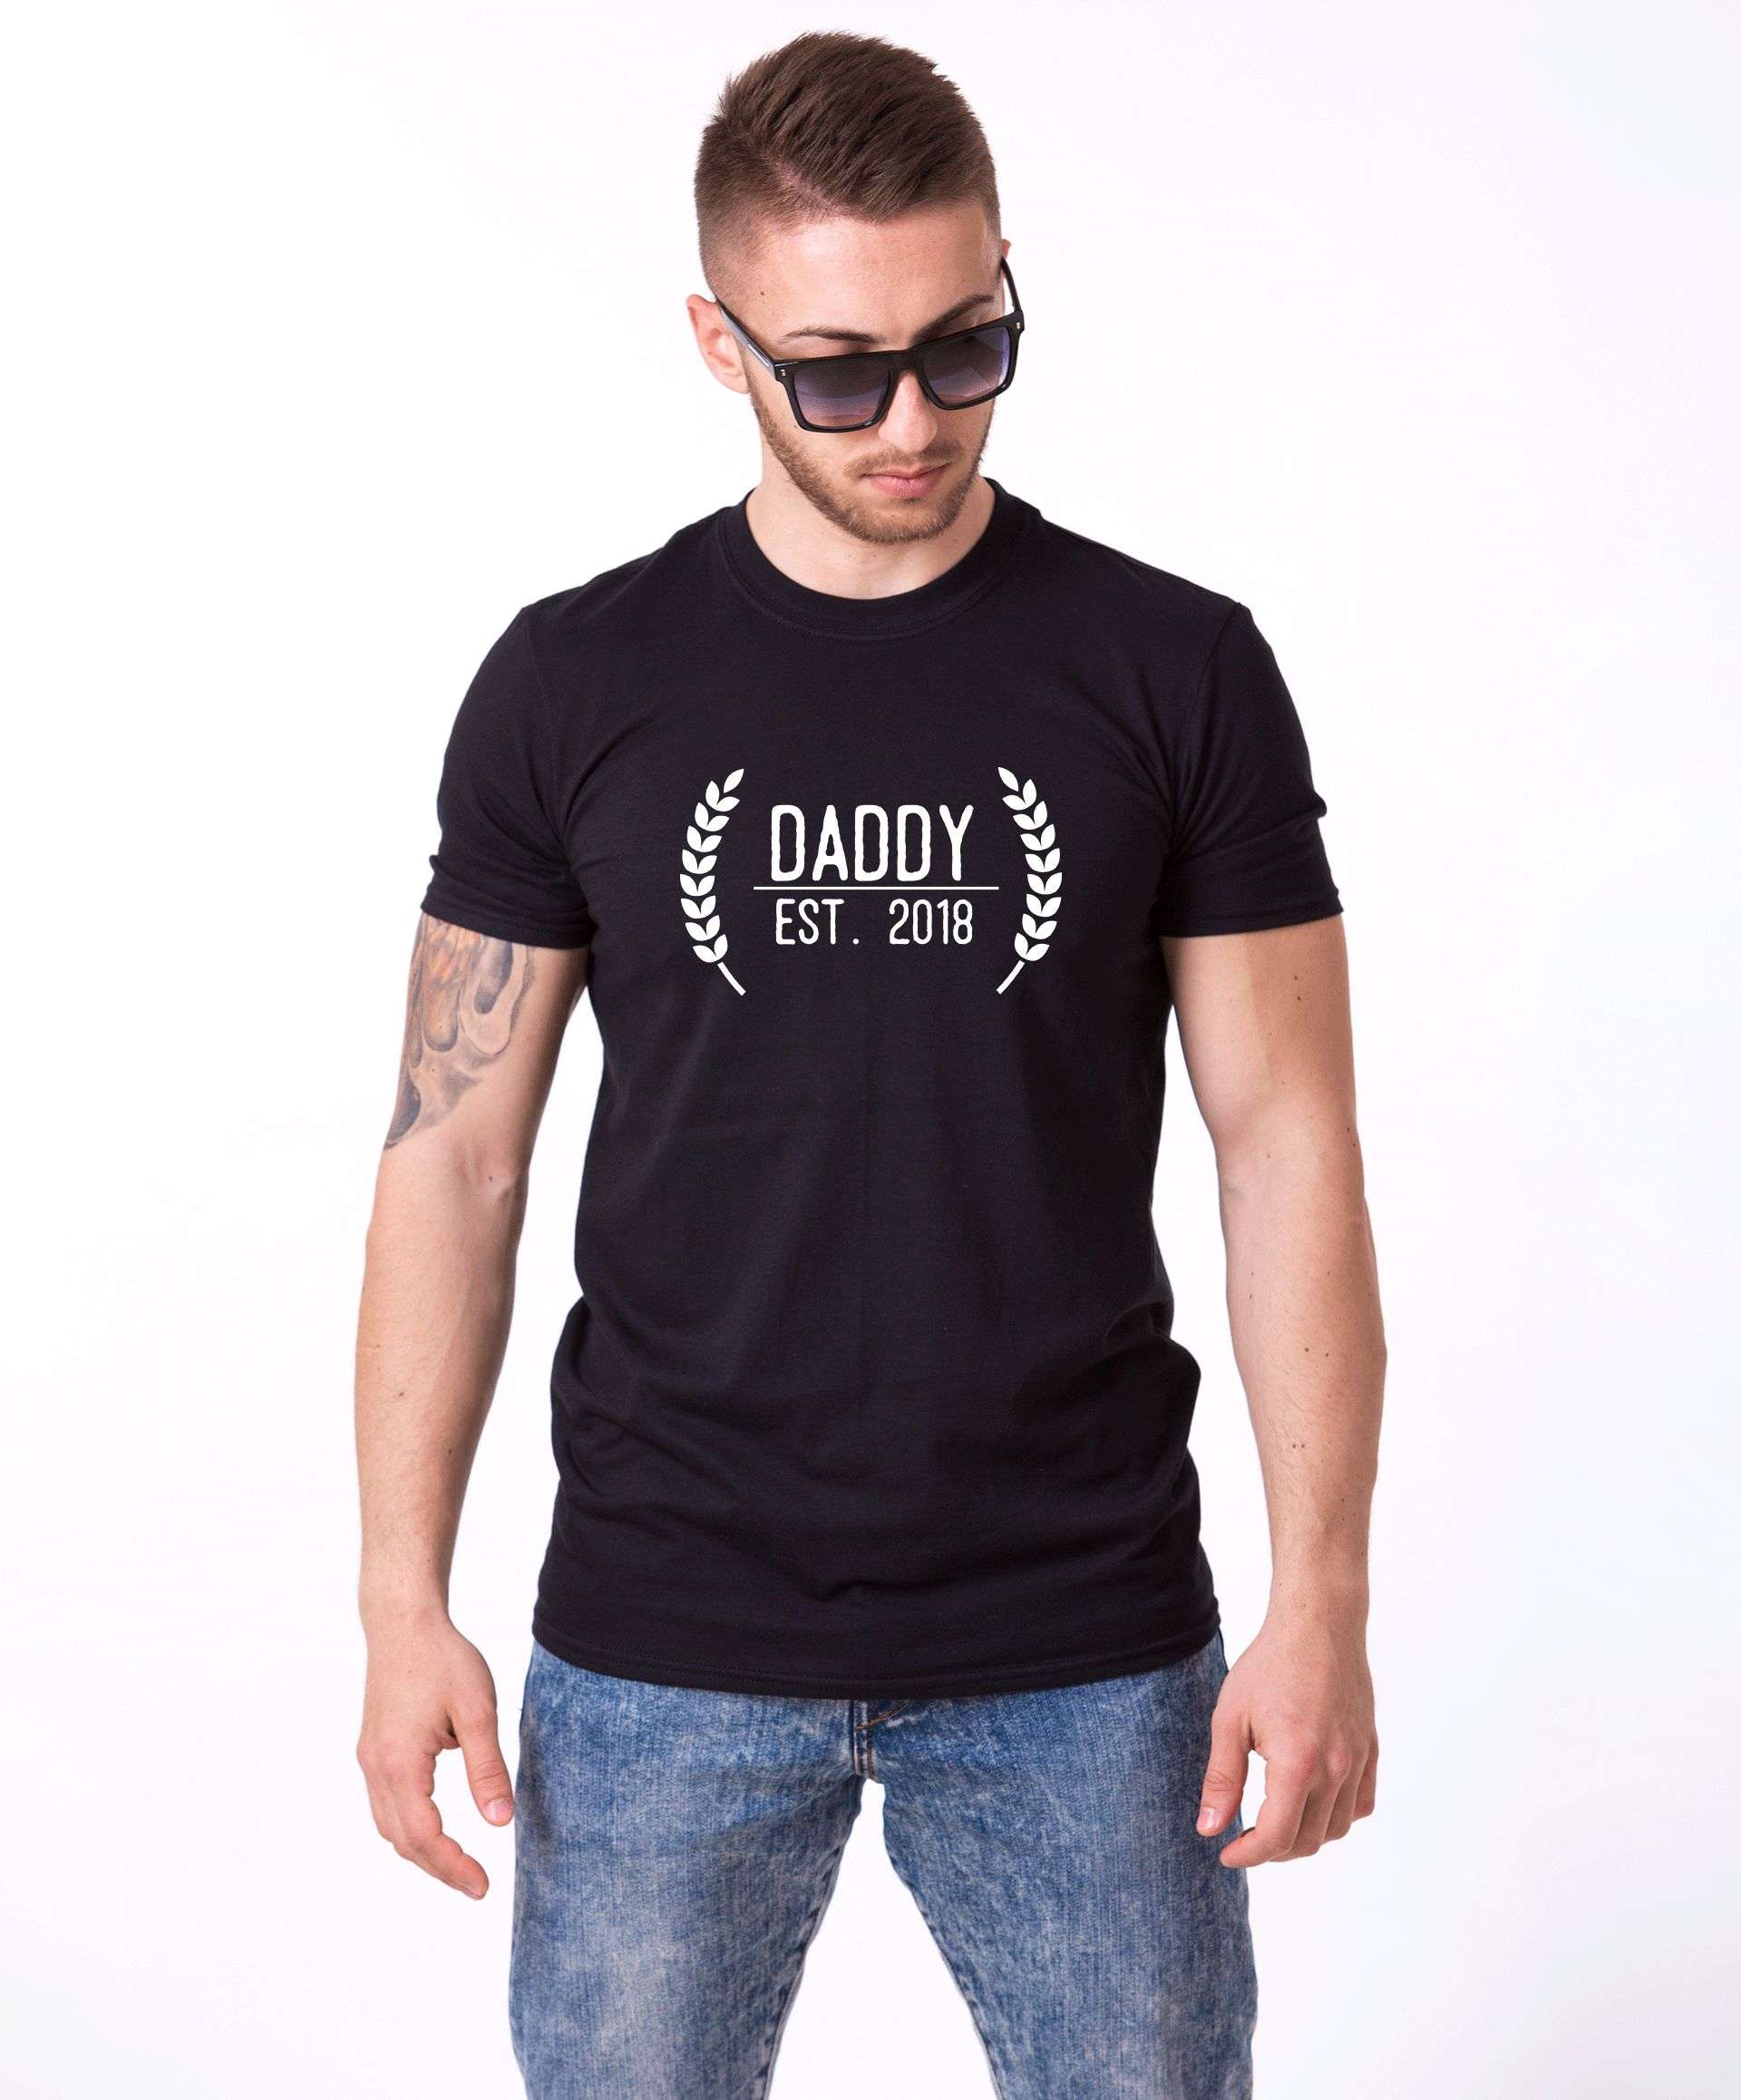 Daddy Est. Shirt, Daddy Shirt, Father's Day, Father's Day Shirt